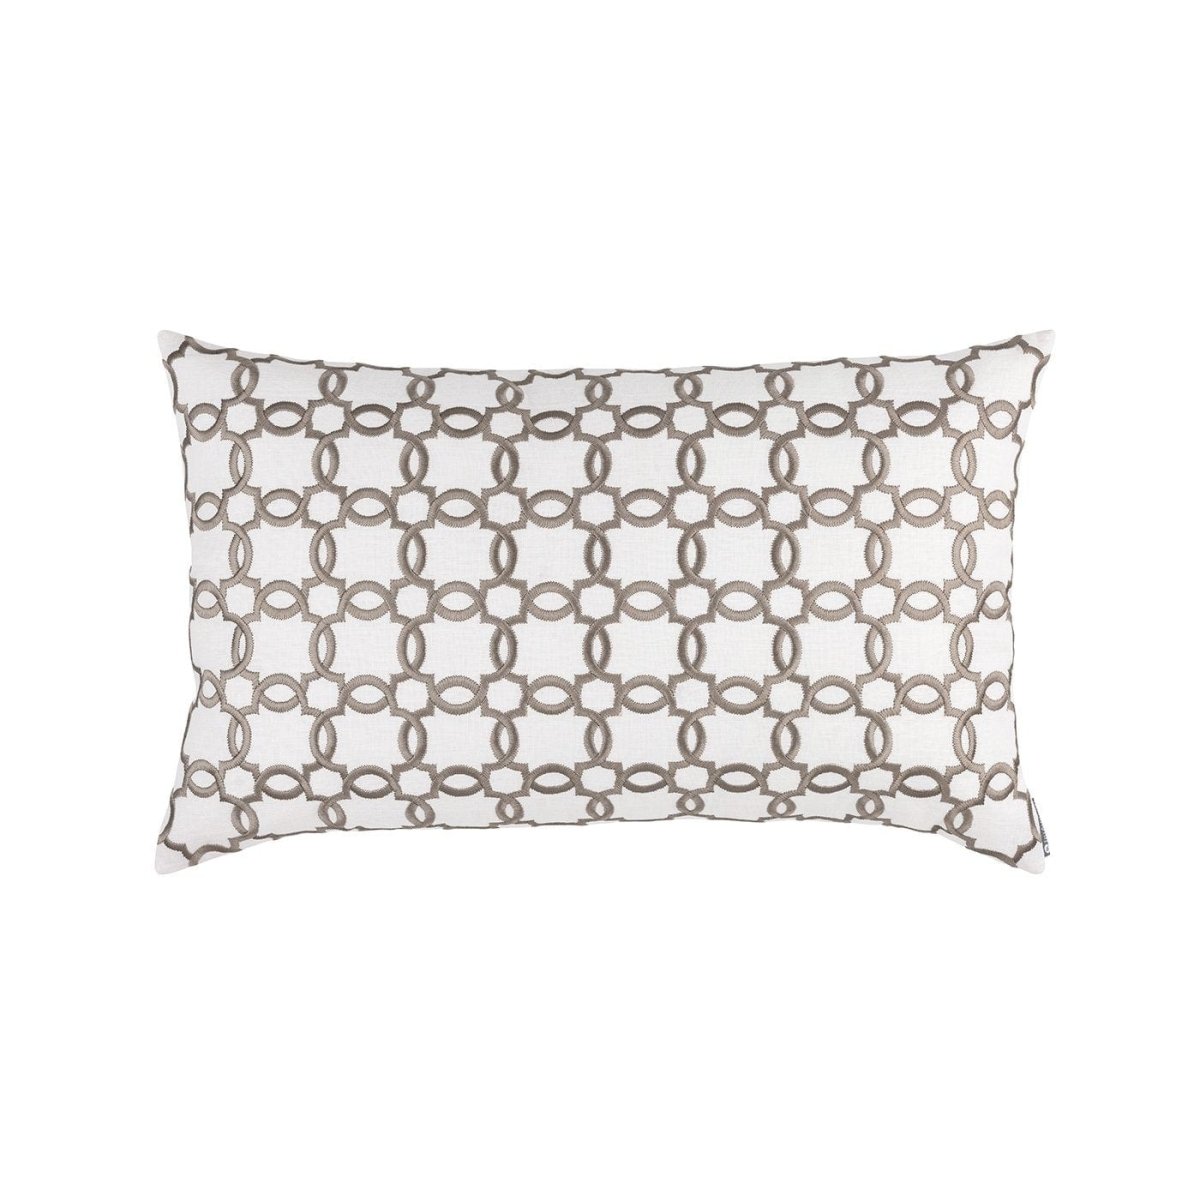 Lynx White & Dark Sand Large Pillow by Lili Alessandra | Fig Linens 